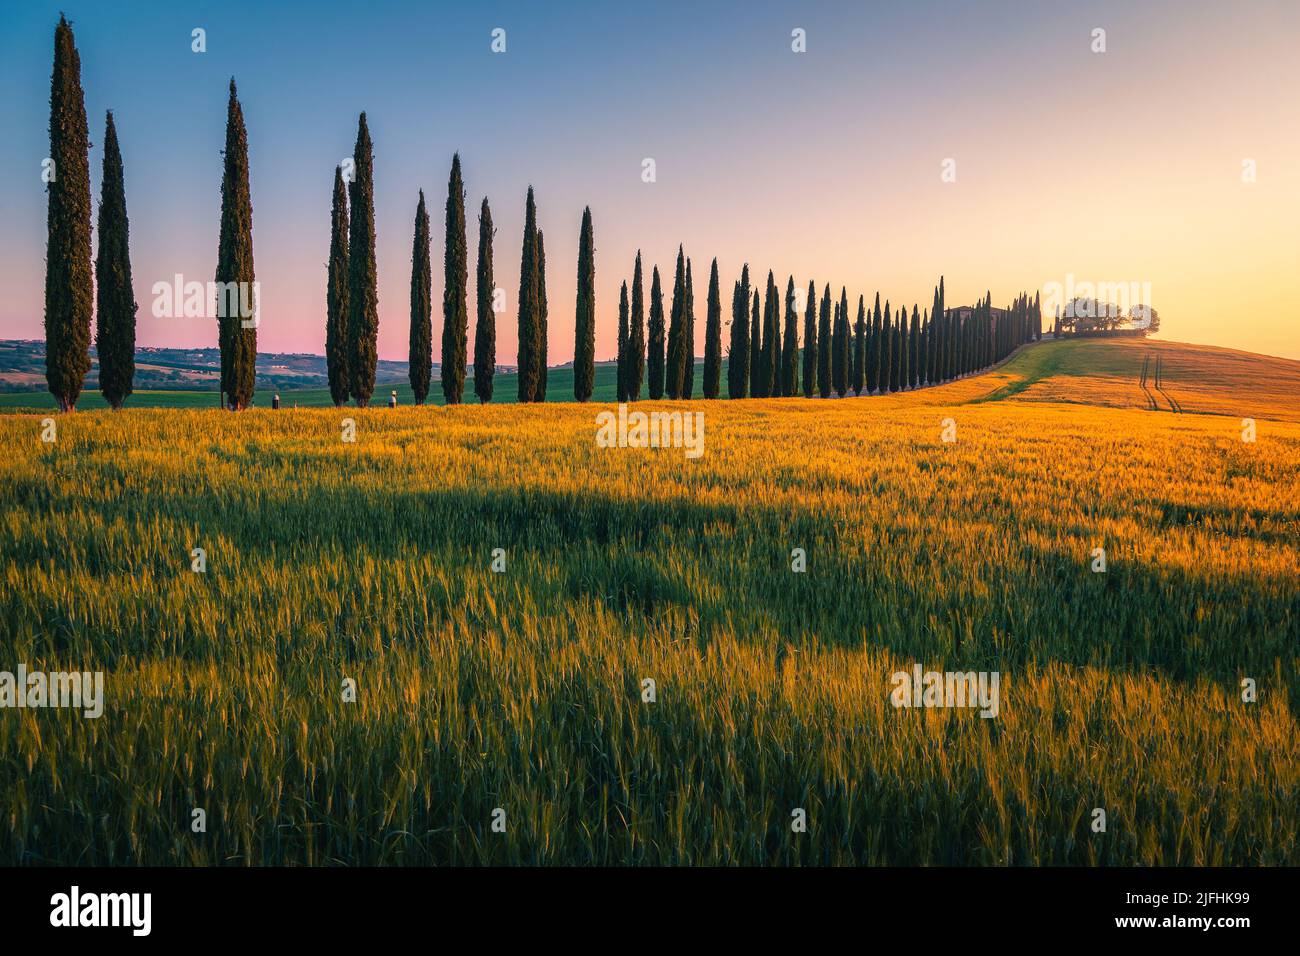 House on the hill and rural road decorated with cypresses trees in row. Wonderful tuscan countryside scenery with grain fields at sunrise, Tuscany, It Stock Photo